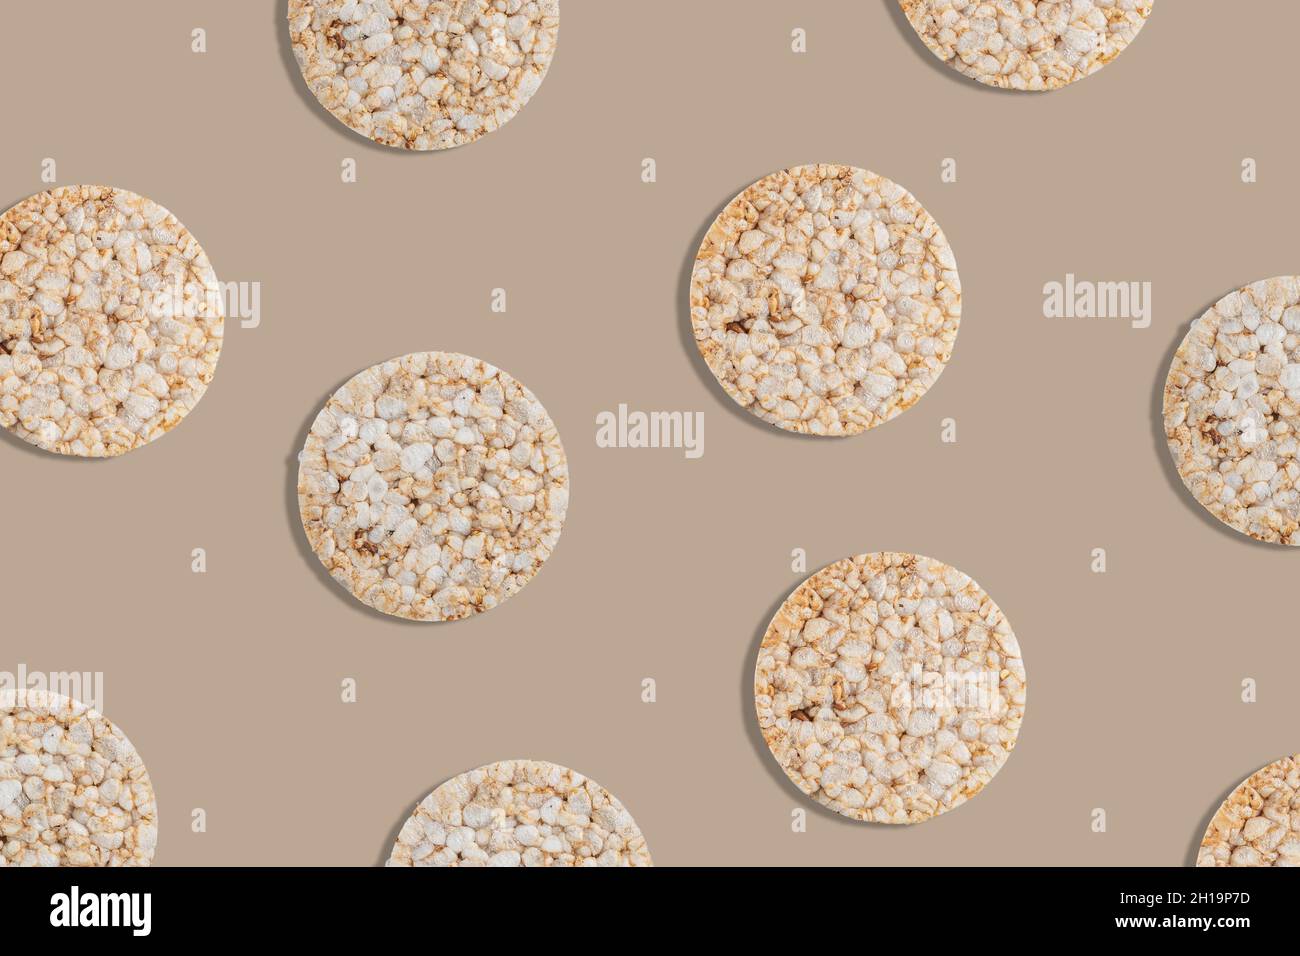 Creative pattern of rice cakes on bright background. Healthy lifestyle concept. Top view. Stock Photo